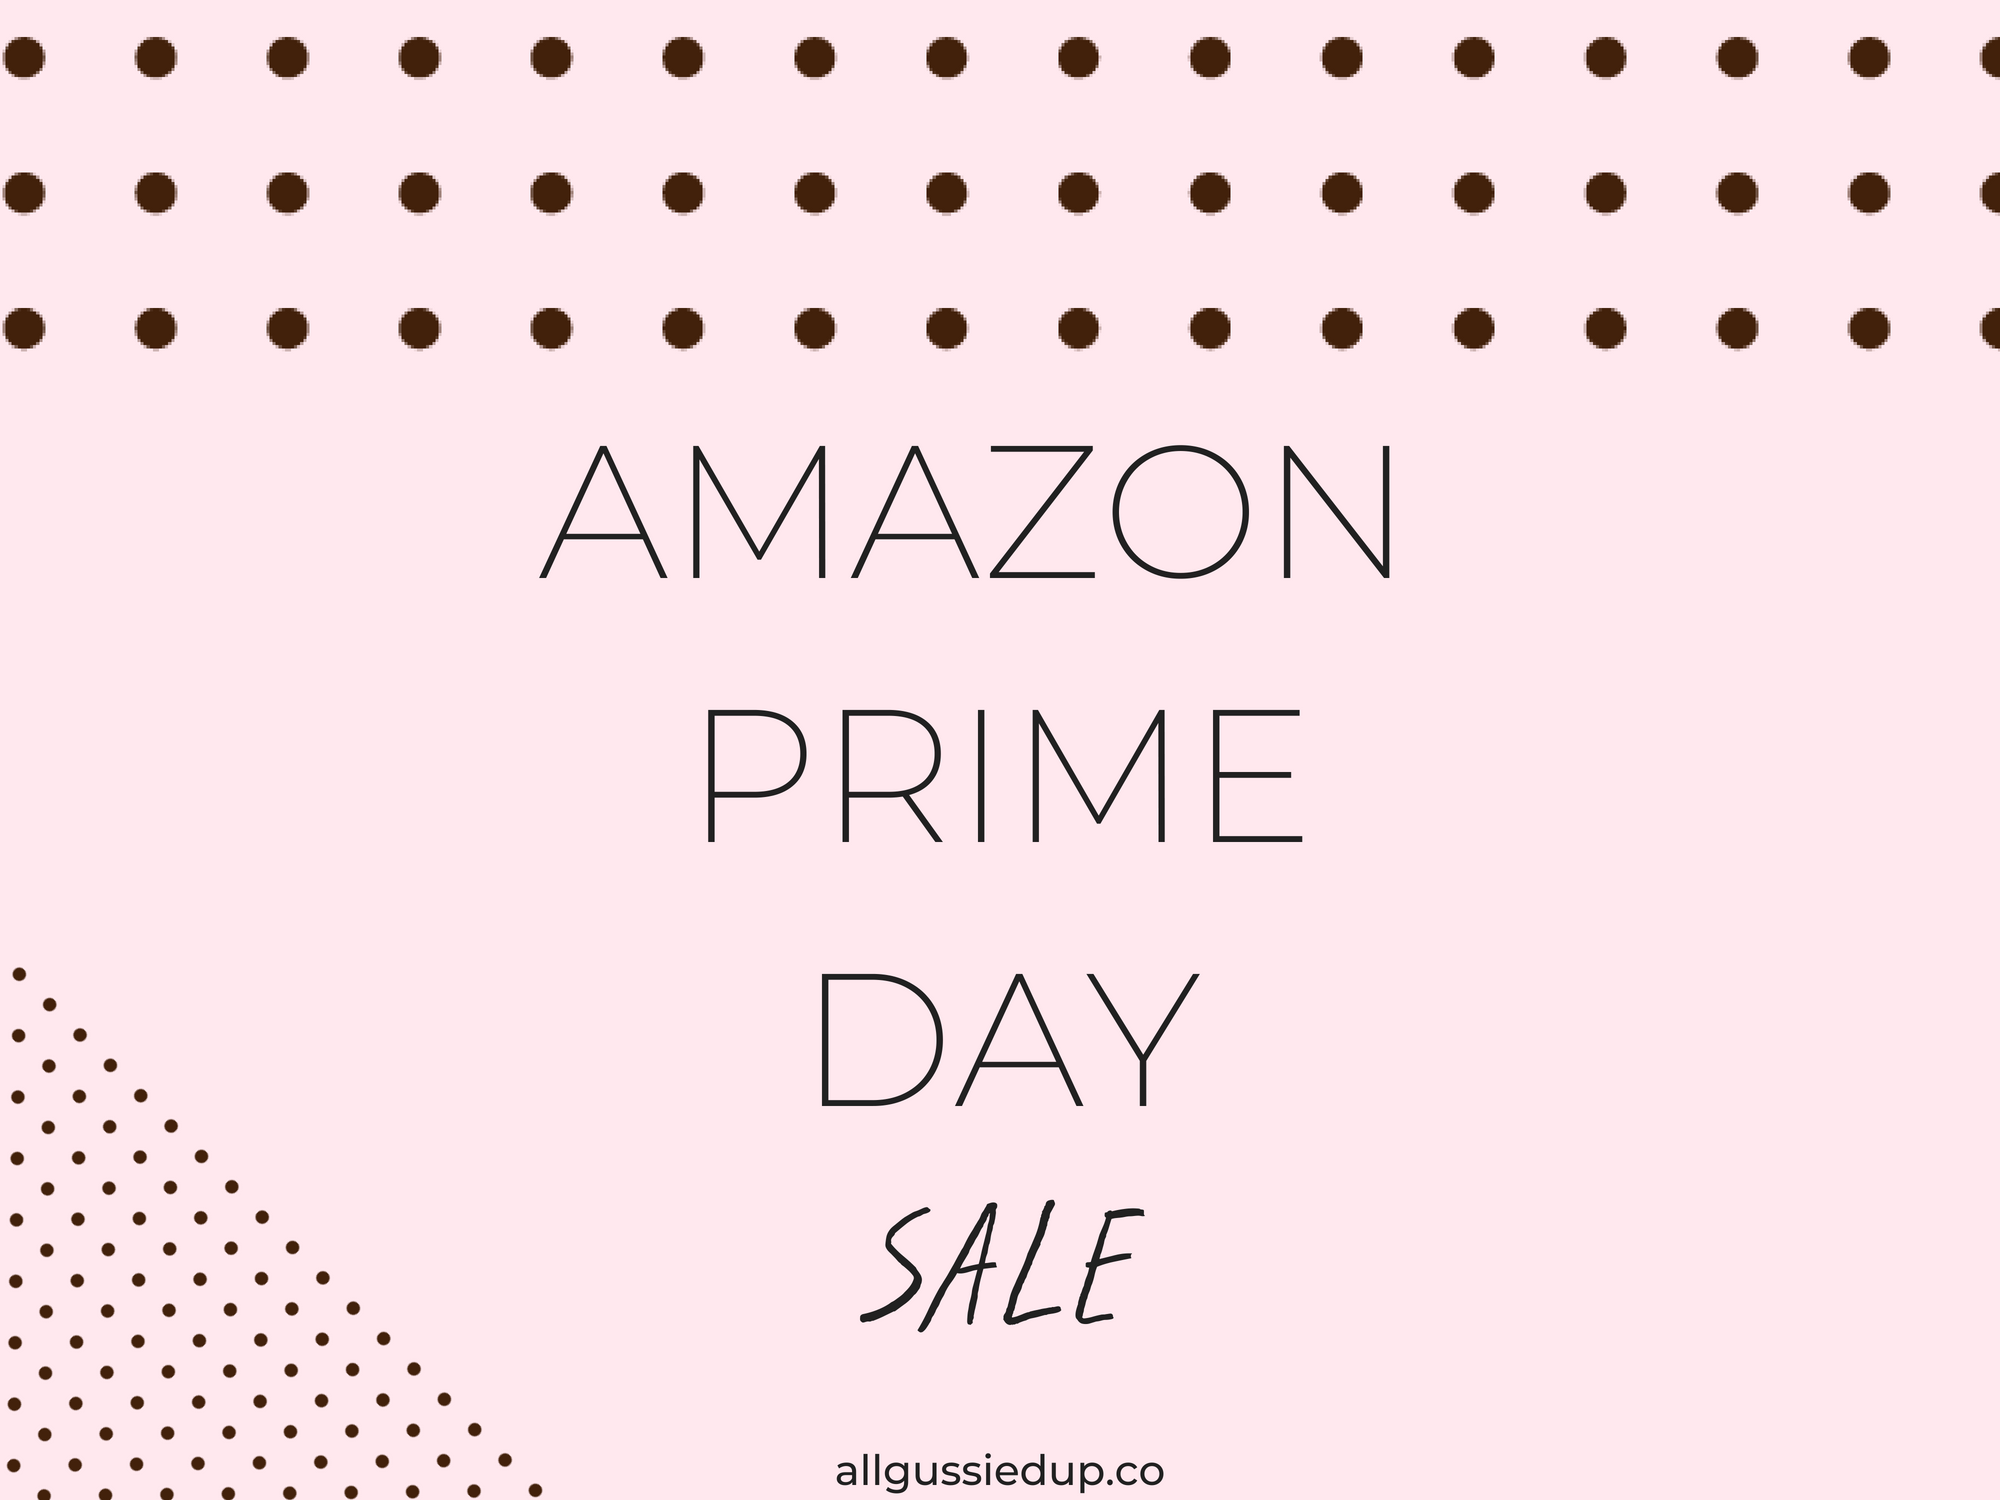 What To Buy on Amazon Prime Day